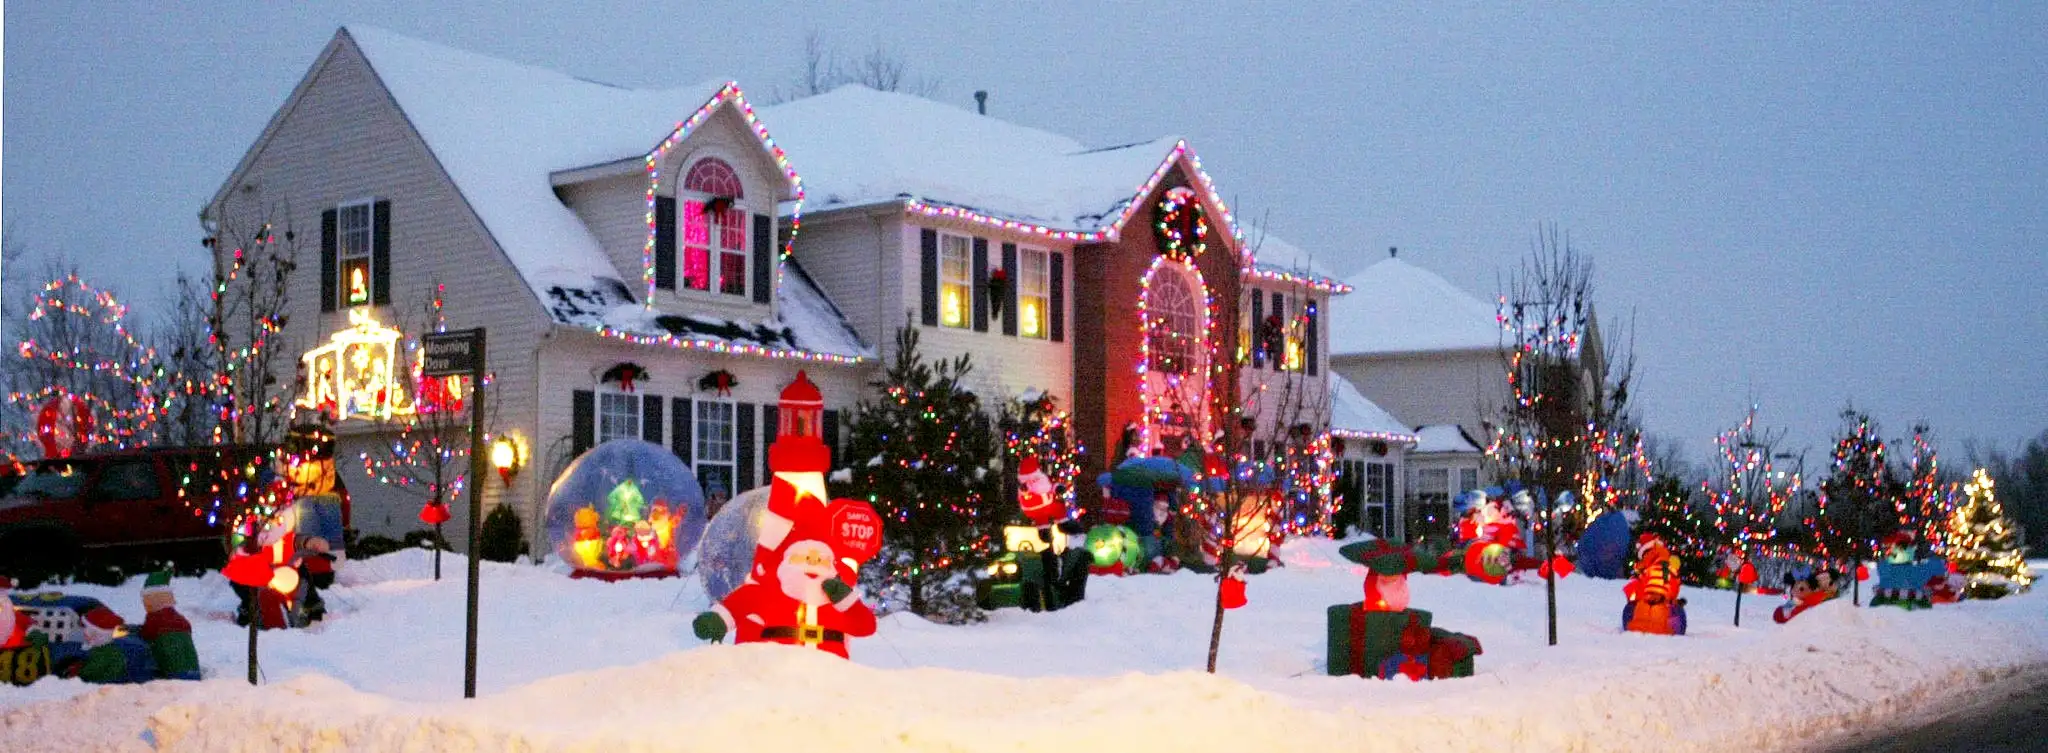 Inflatable outdoor Christmas decorations